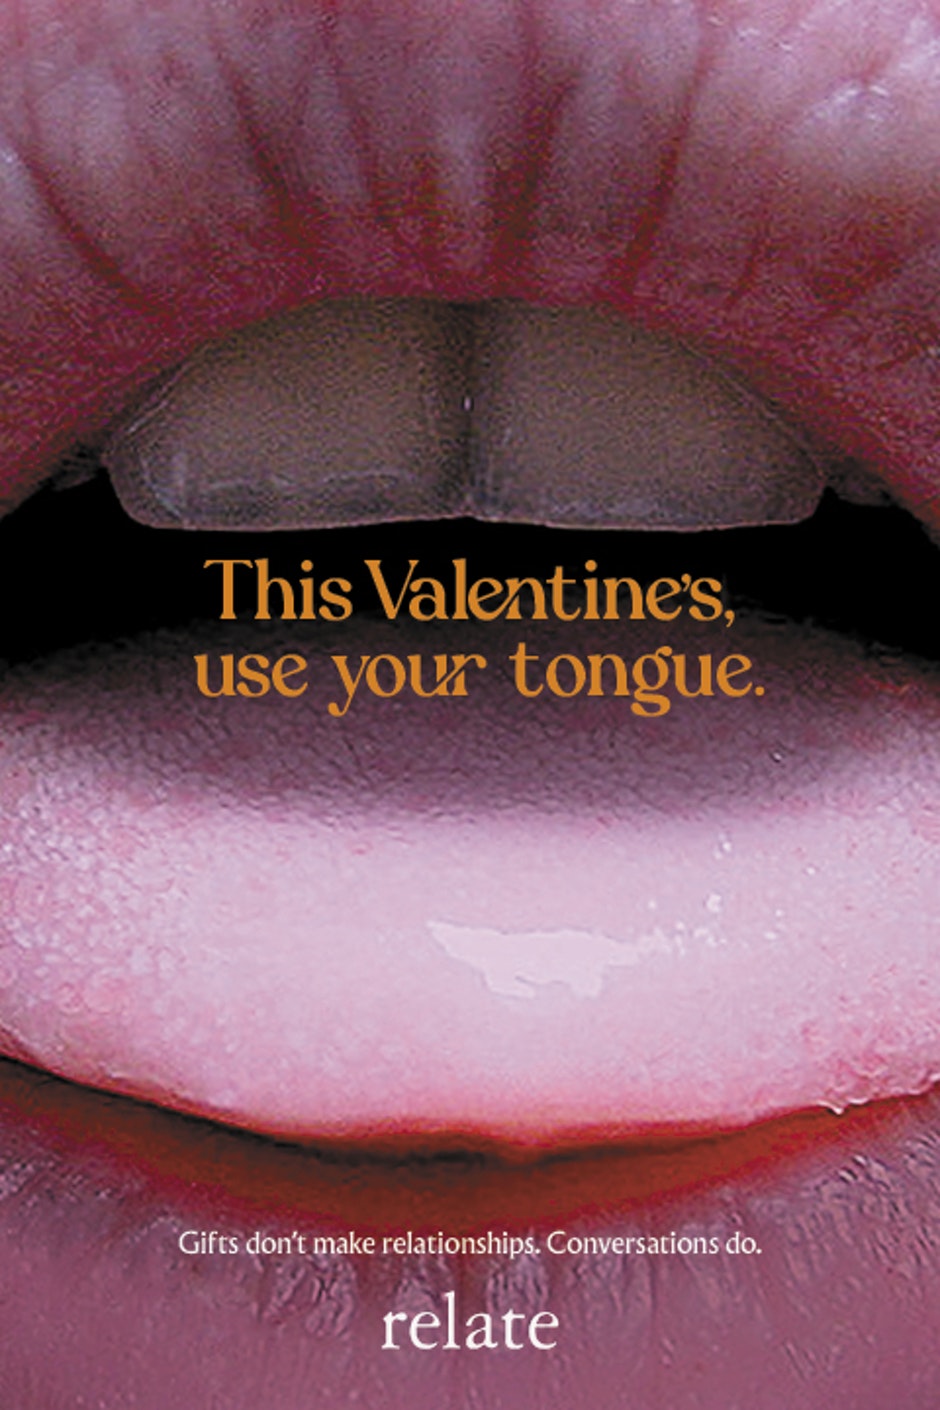 Ogilvy UK wants you to use your mouth this Valentine's Day